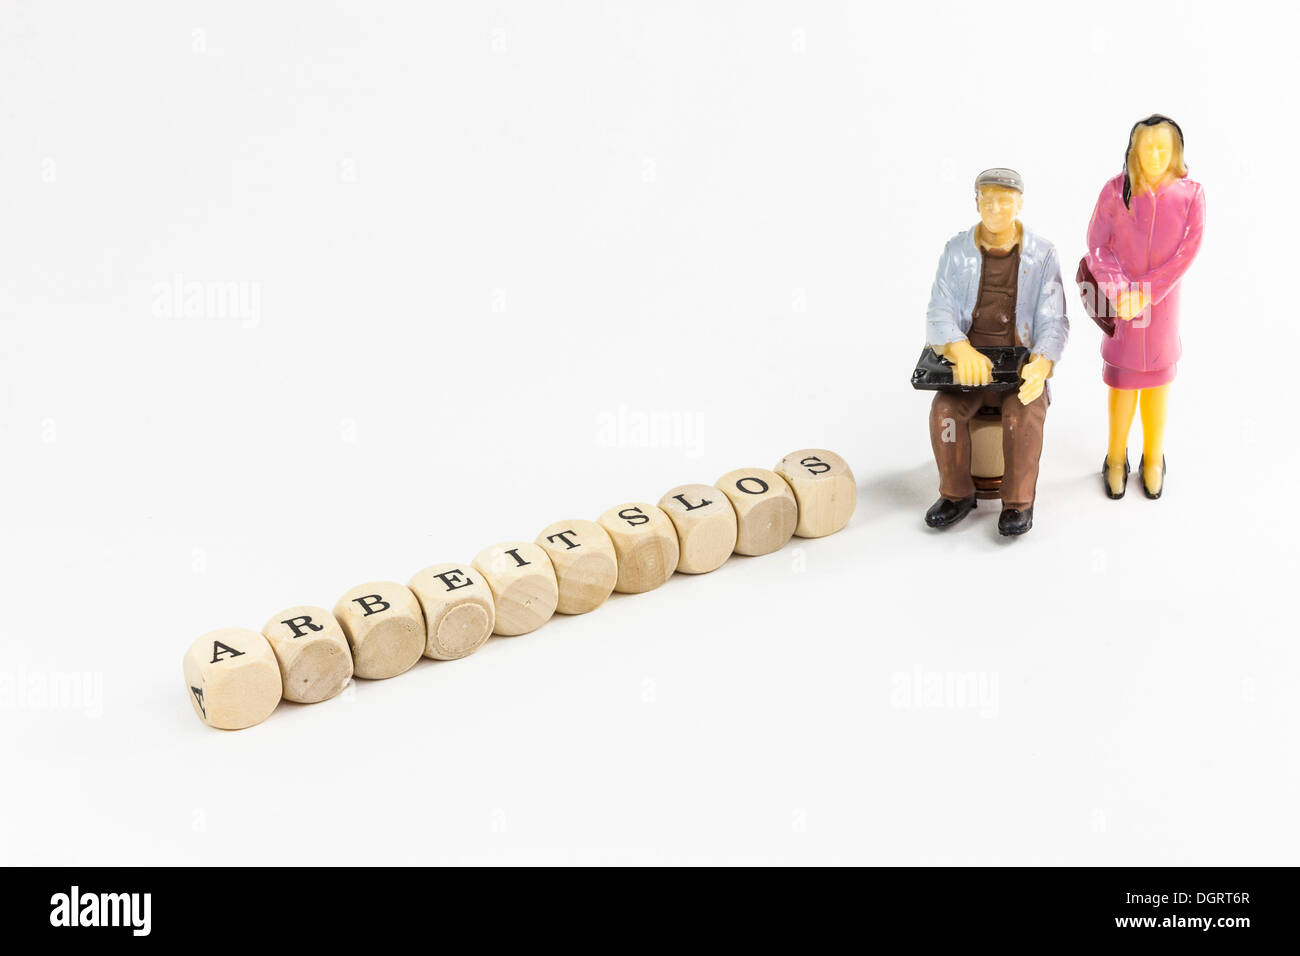 Miniature figures of an unemployed couple, letter cubes forming the word 'arbeitslos', German for 'unemployed' Stock Photo